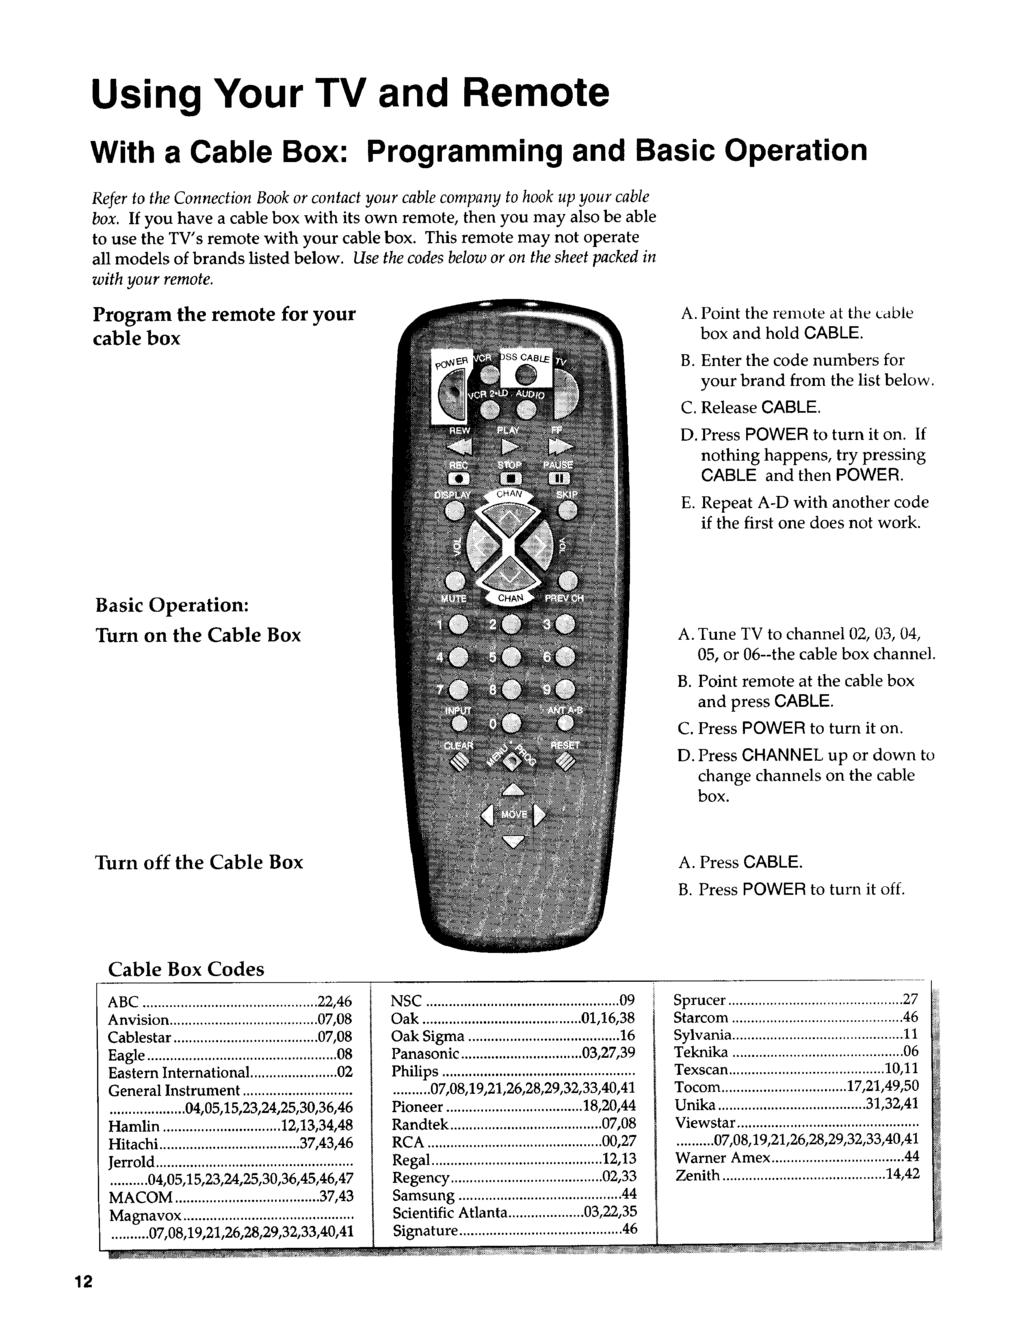 Using Your TV and Remote With a Cable Box: Programming and Basic Operation Refer to the Connection Book or contact your cable company to hook up your cable box.